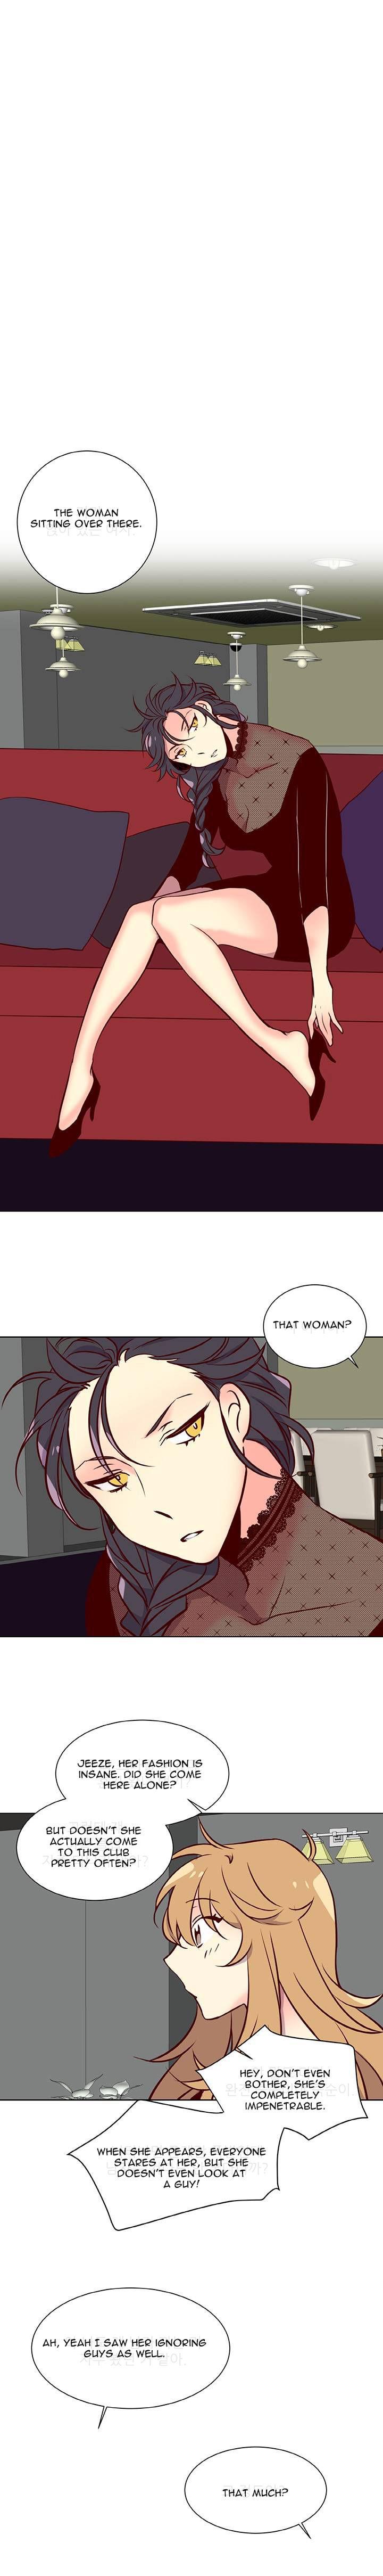 Romance Two Lives in the Same House Ch. 1-24 - Original Gay Bang - Page 3